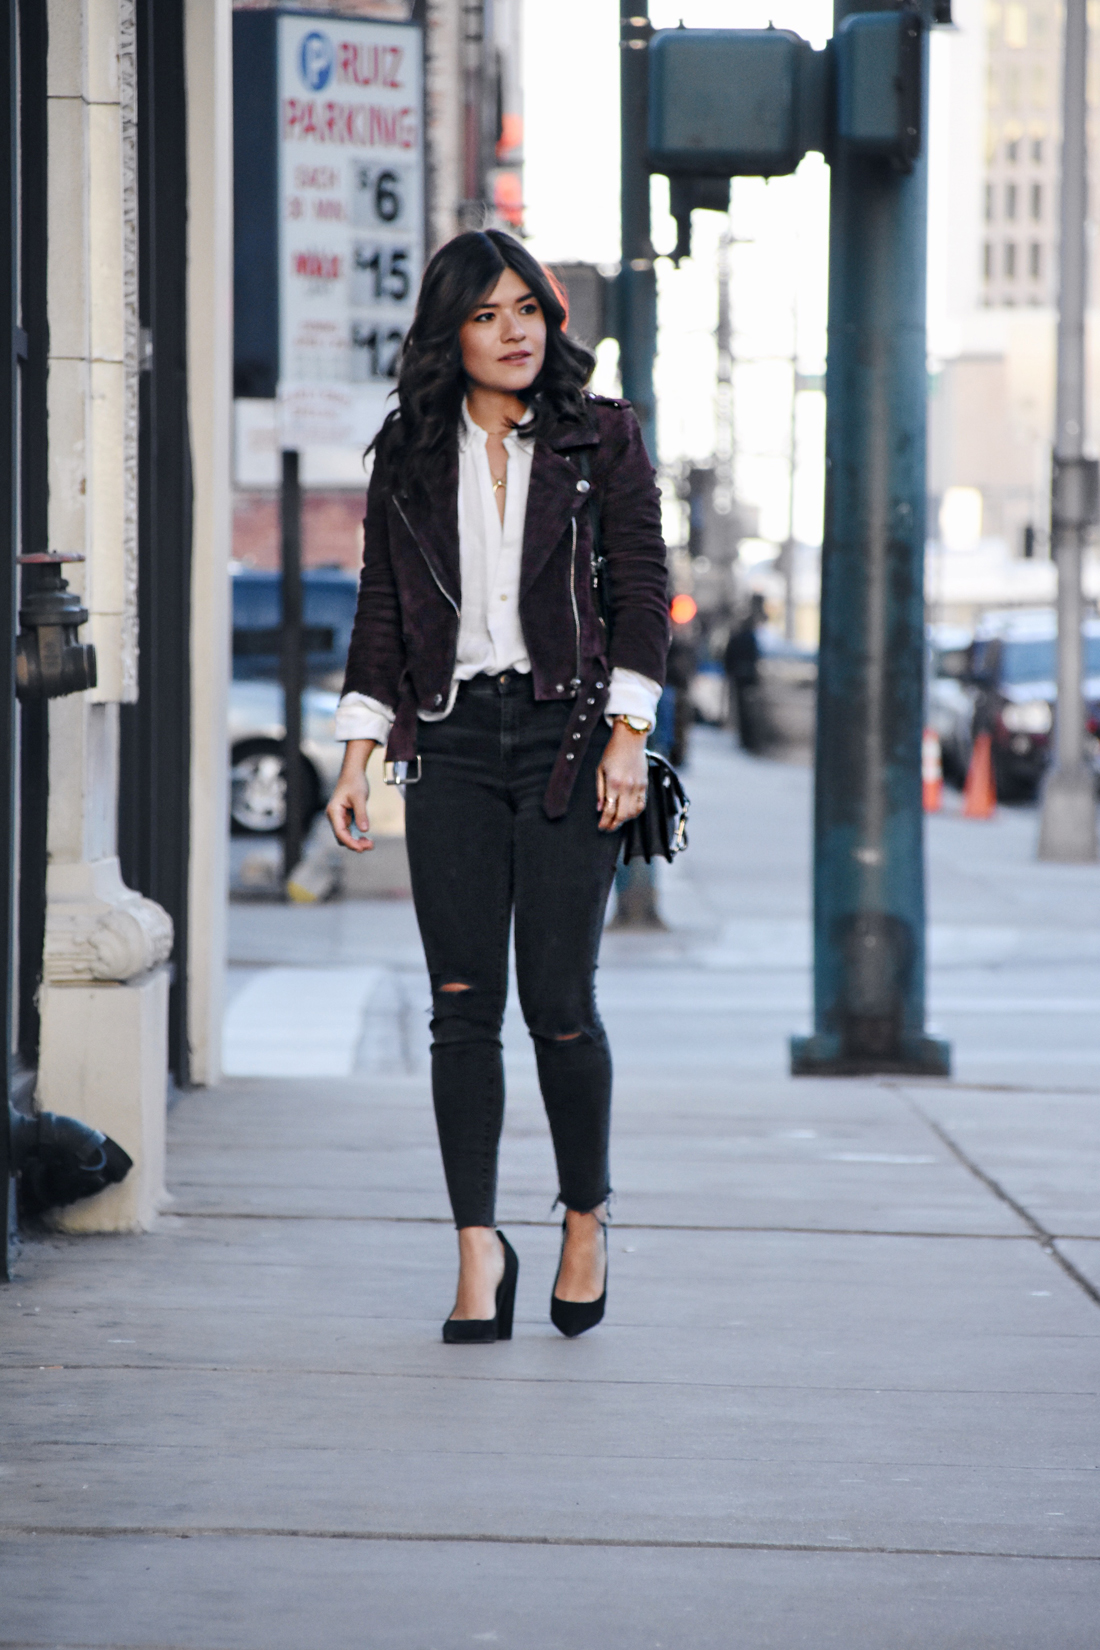 Carolina Hellal of Chic Talk wearing a Suede jacket, free people top, Madewell jeans, Rebecca Minkoff bag, and Sam Edelman shoes